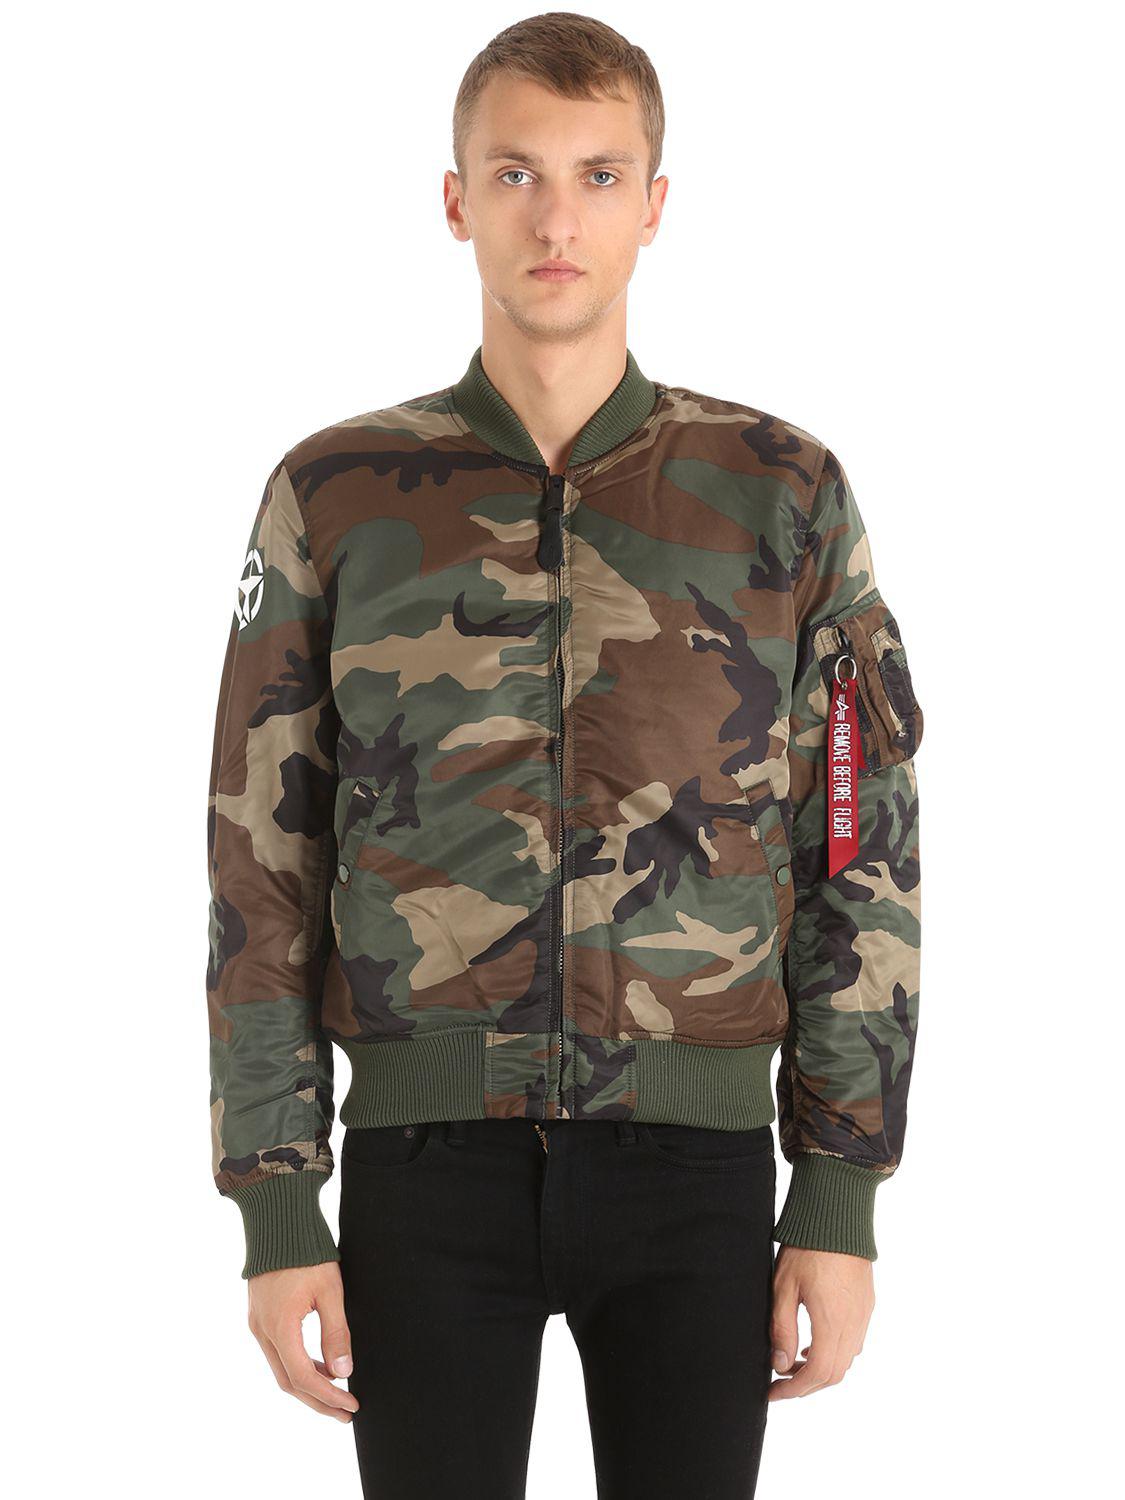 Alpha Industries Ma-1 Vf Army Slim Camo Bomber Jacket for Men - Lyst